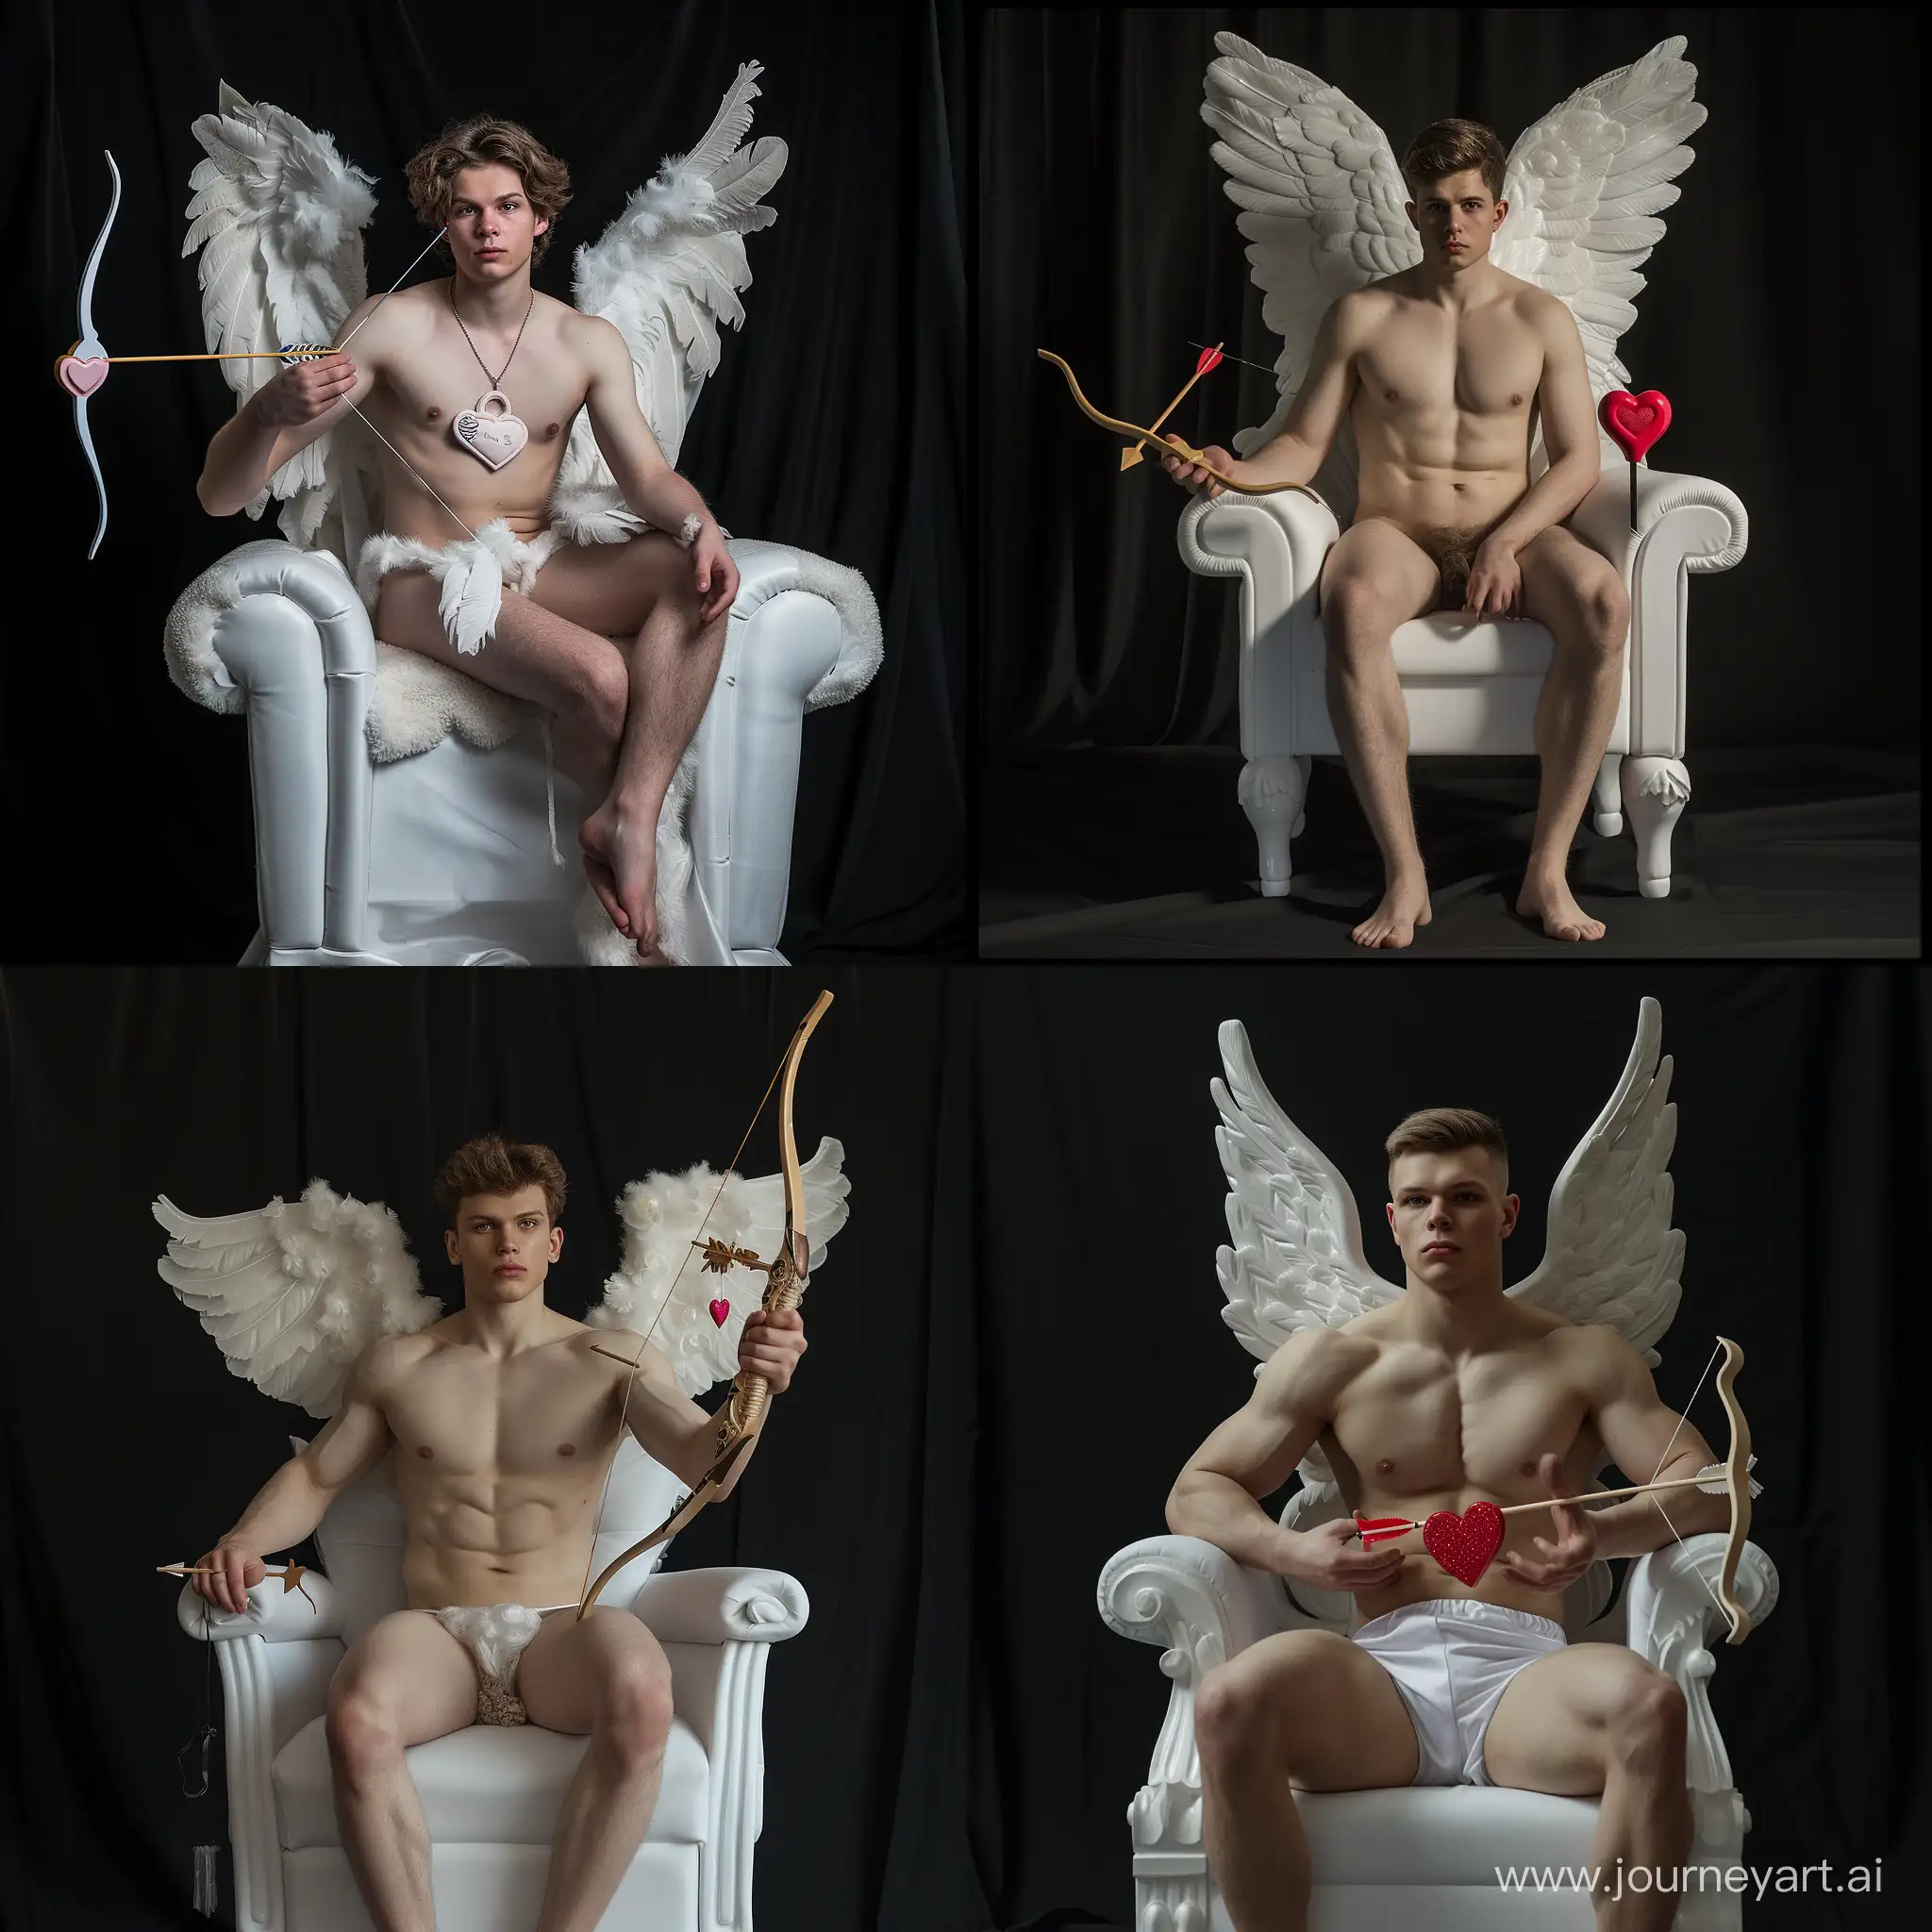 A 30-year-old cupid with a smooth face, who weighs 80 kg, sits in a black studio, on a white throne with a toy bow in his hand and an arrow with a heart, his face is open and looks straight
